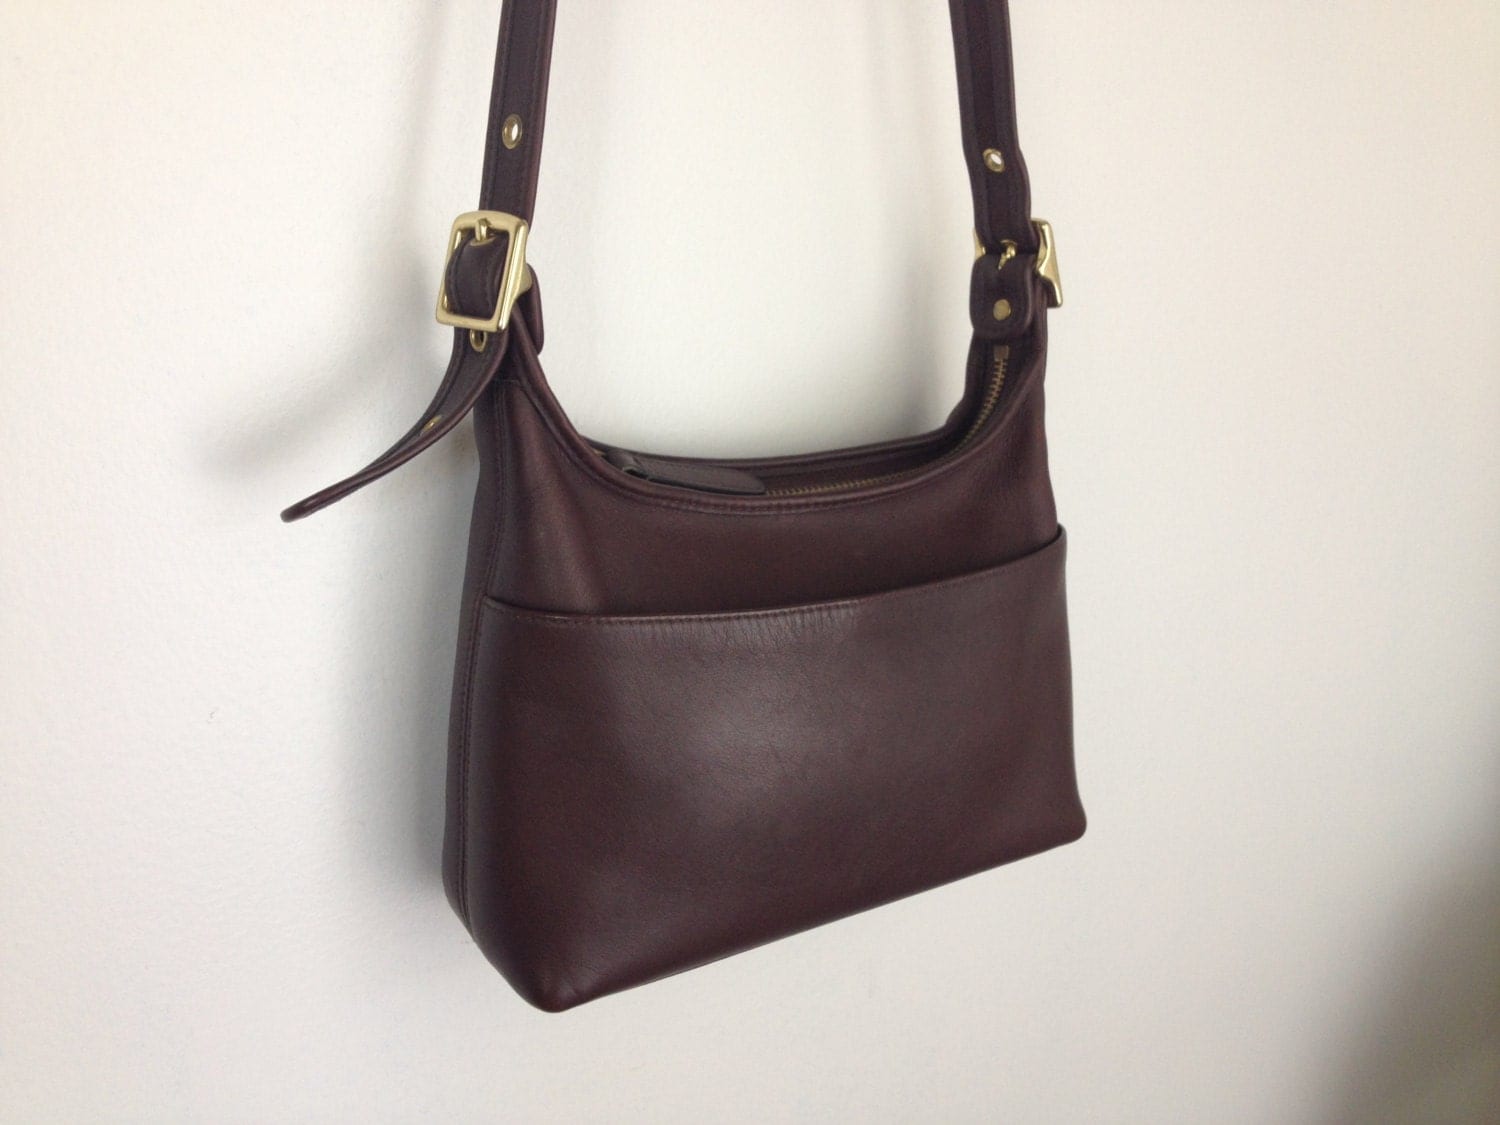 Classic COACH Chocolate Brown Leather Purse. by WolfeVintage